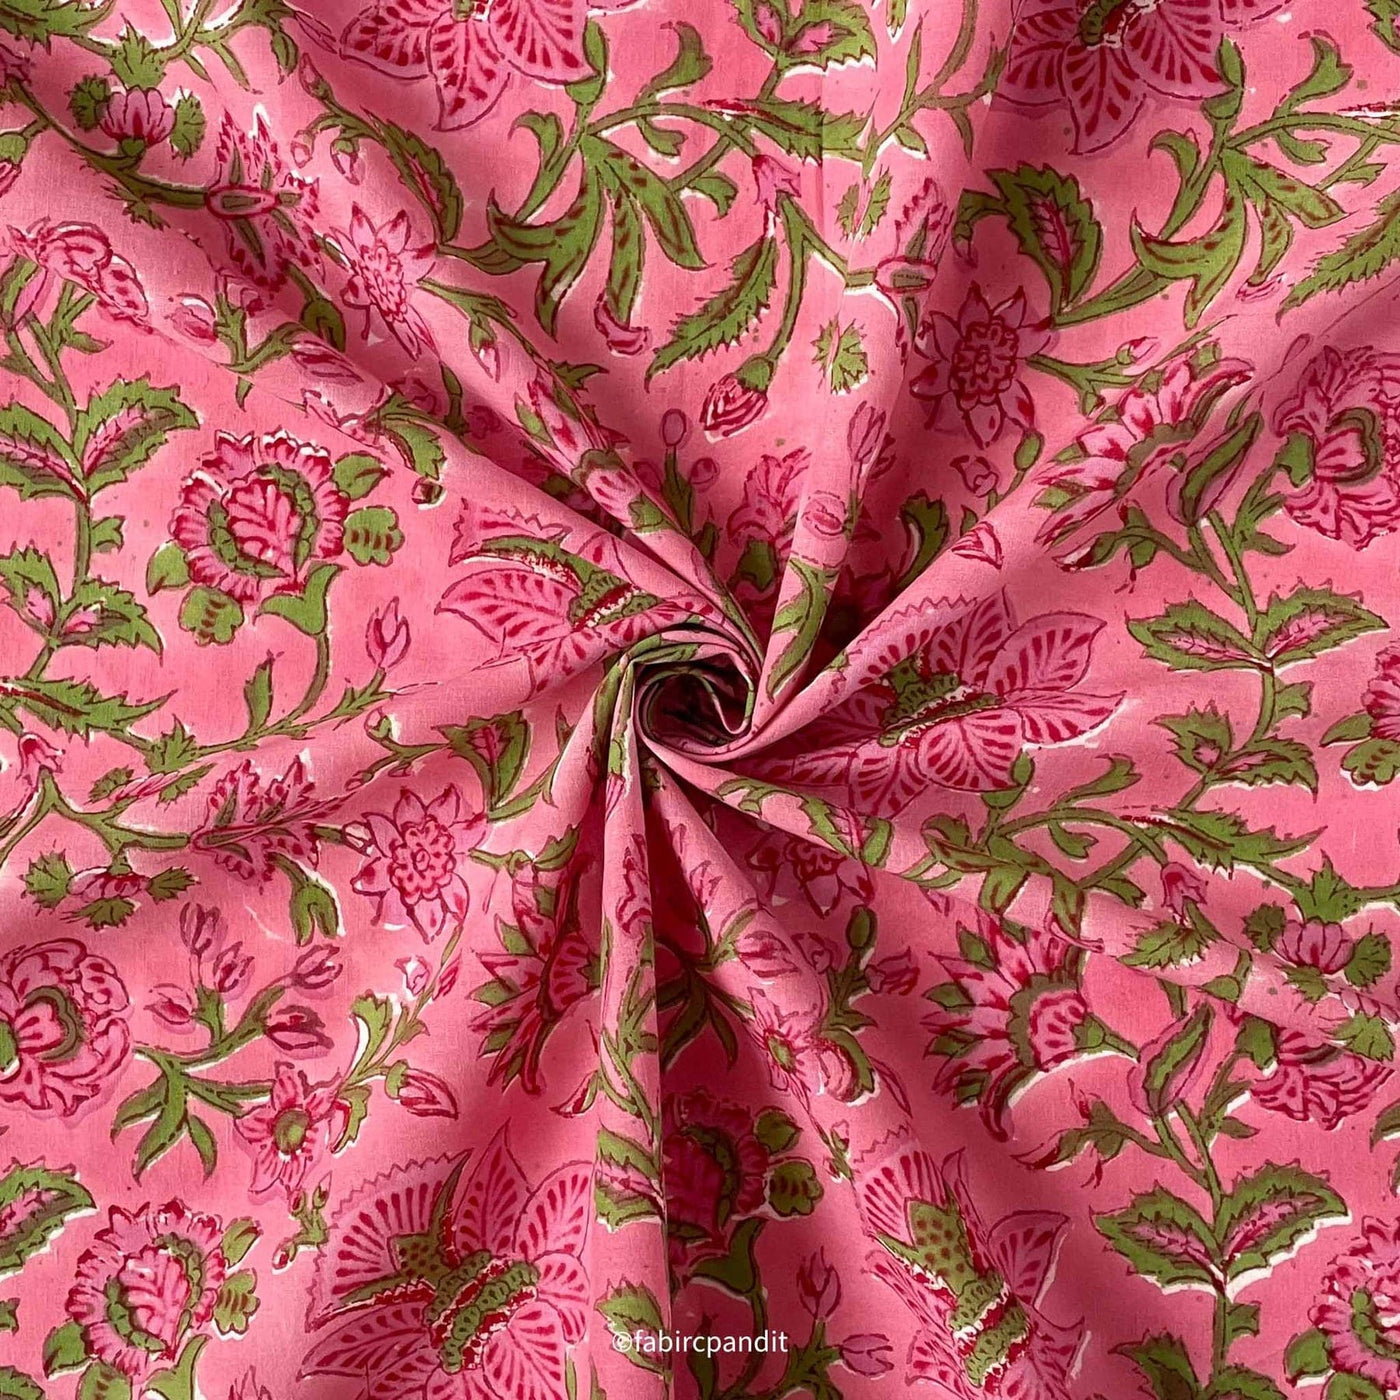 Fabric Pandit Fabric Berry Pink and Green Garden of Jasmine Hand Block Printed Pure Cotton Fabric (Width 43 inches)